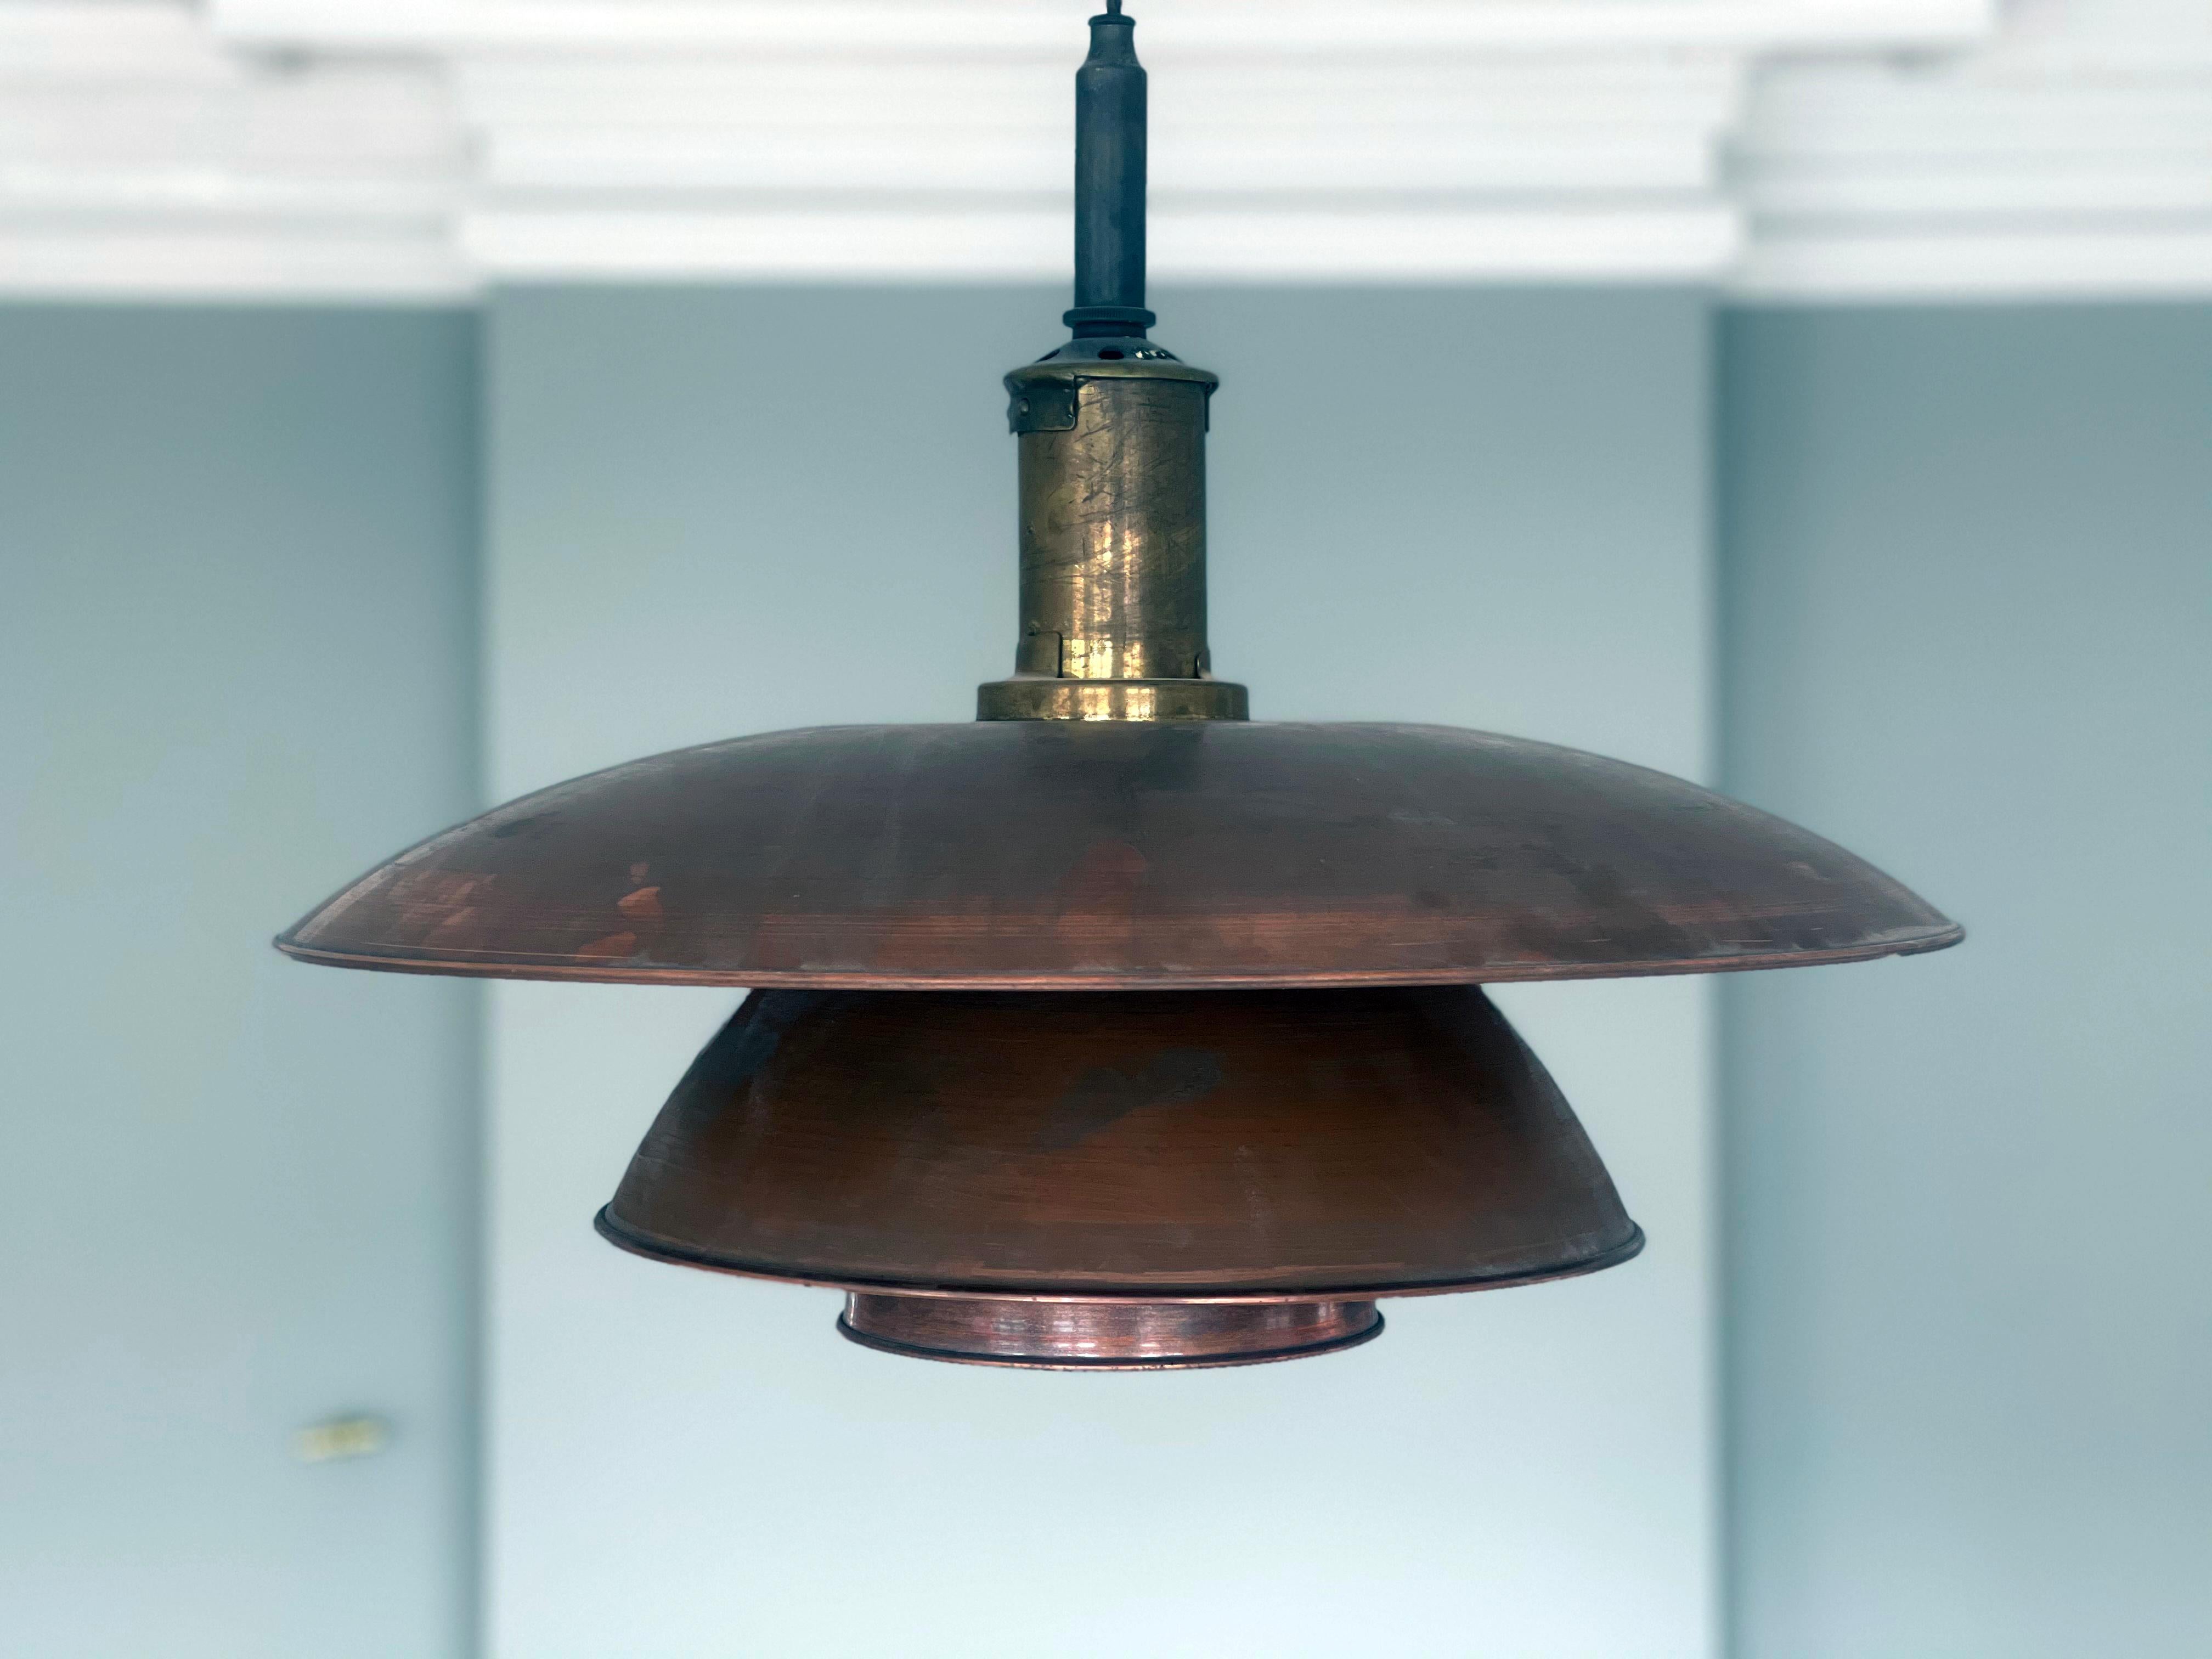 POUL HENNINGSEN & LOUIS POULSEN, SCANDINAVIAN MODERN

Large PH Pendant 5/5 in copper and brass, designed by Poul Henningsen and manufactured by Louis Poulsen. 

Early model. Stamped Pat. Appl, Ca. 1928

Pendant with three shades that gives a